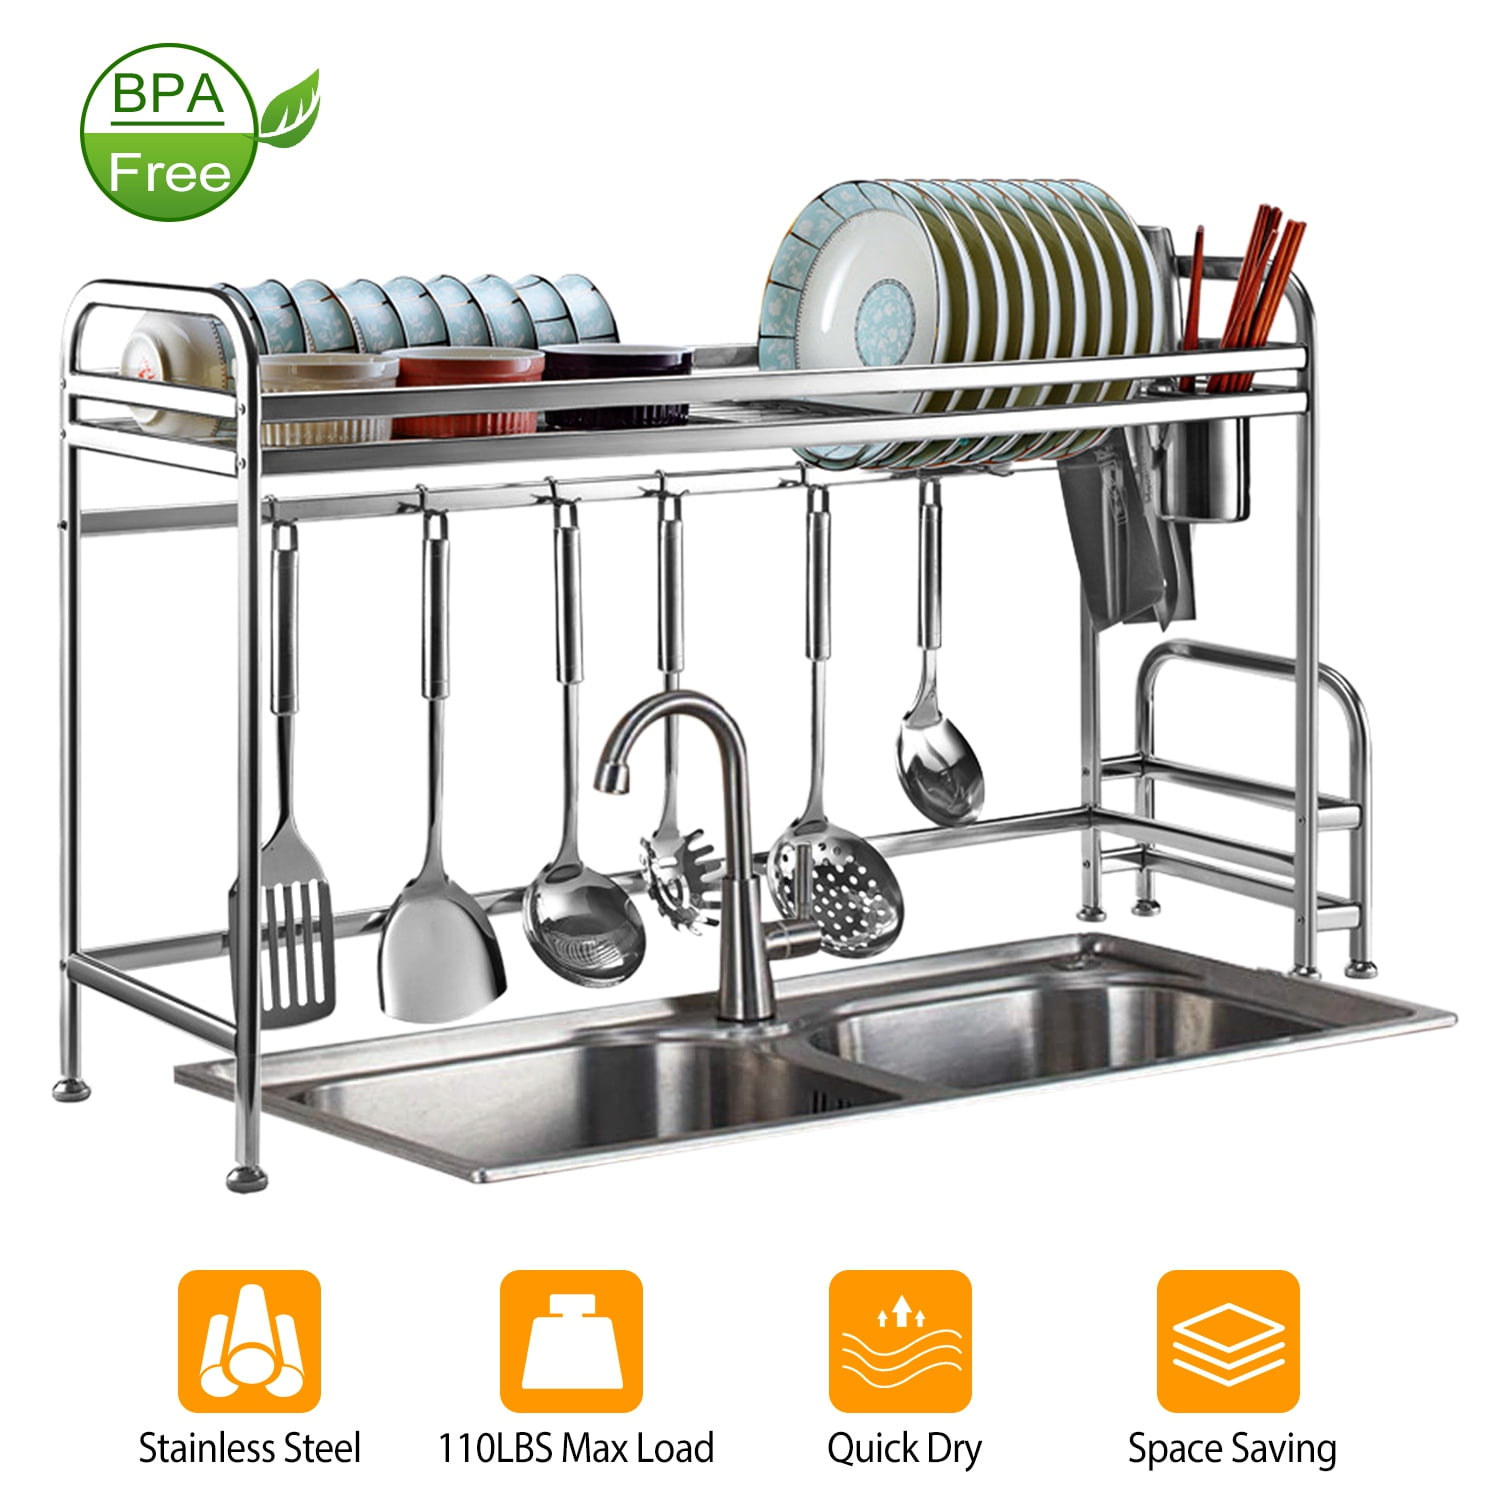 Aluminum Dish Rack Organizer W/ Drying Plate Shelf & Cutlery Container  Space Saving Kitchen Storage Solution From Xianstore08, $42.38